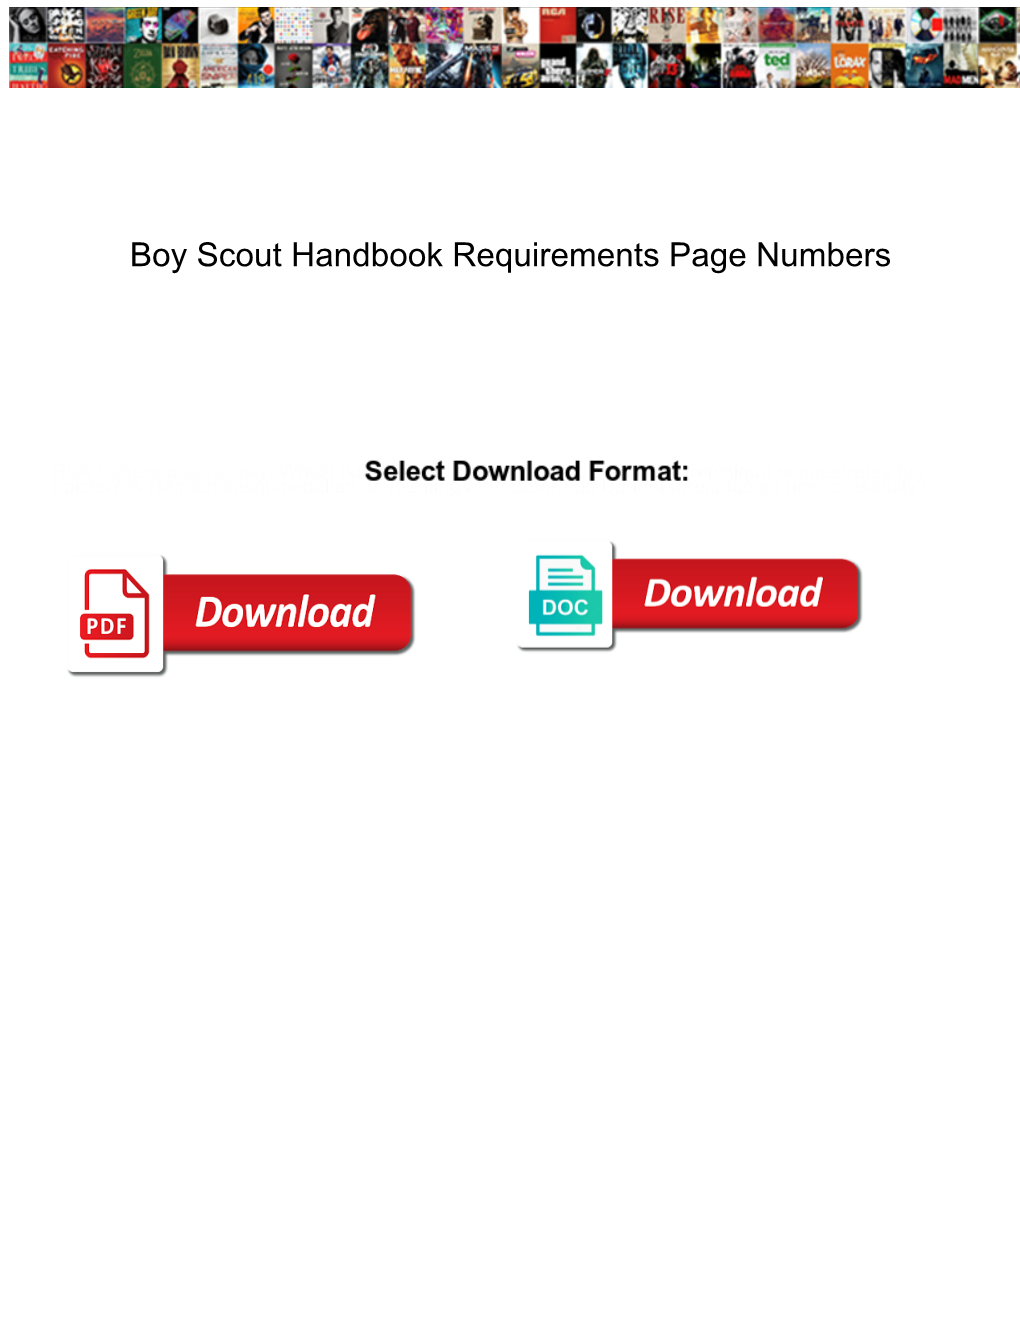 Boy Scout Handbook Requirements Page Numbers